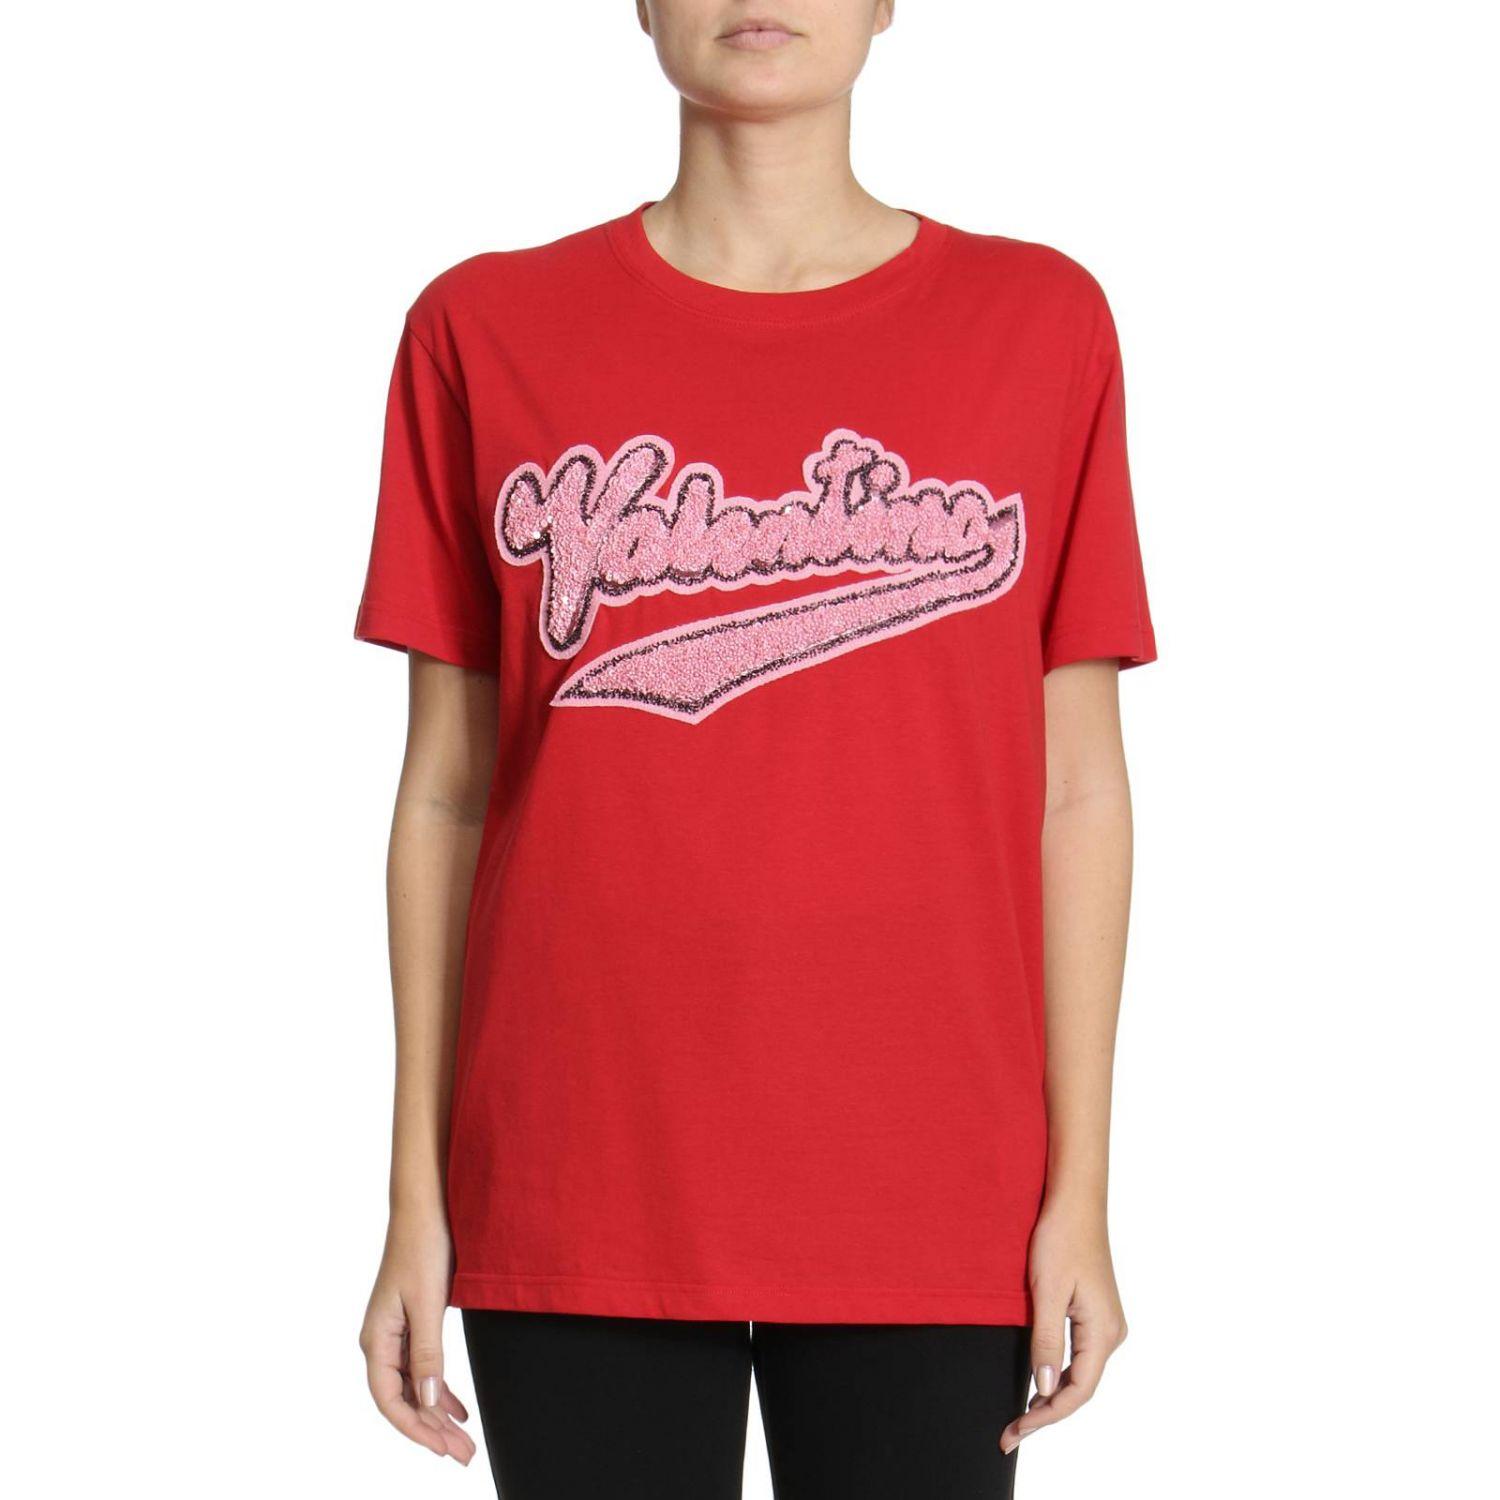 Valentino Embellished Cotton T-shirt in Red - Lyst